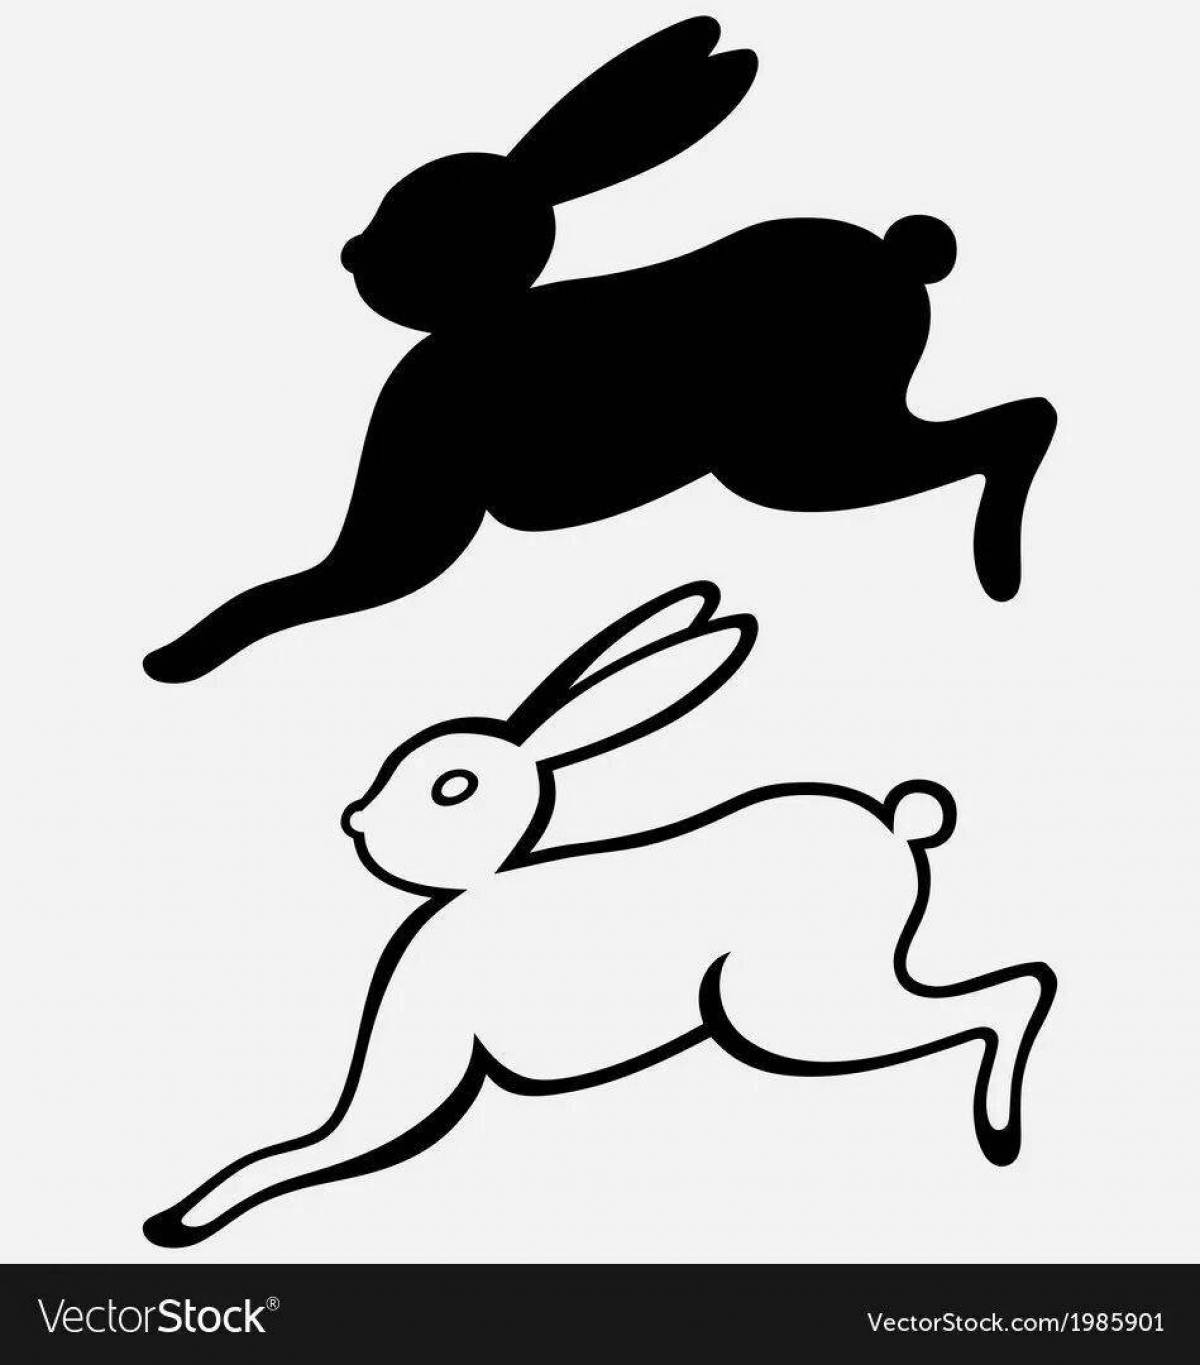 Coloring page energetic running hare